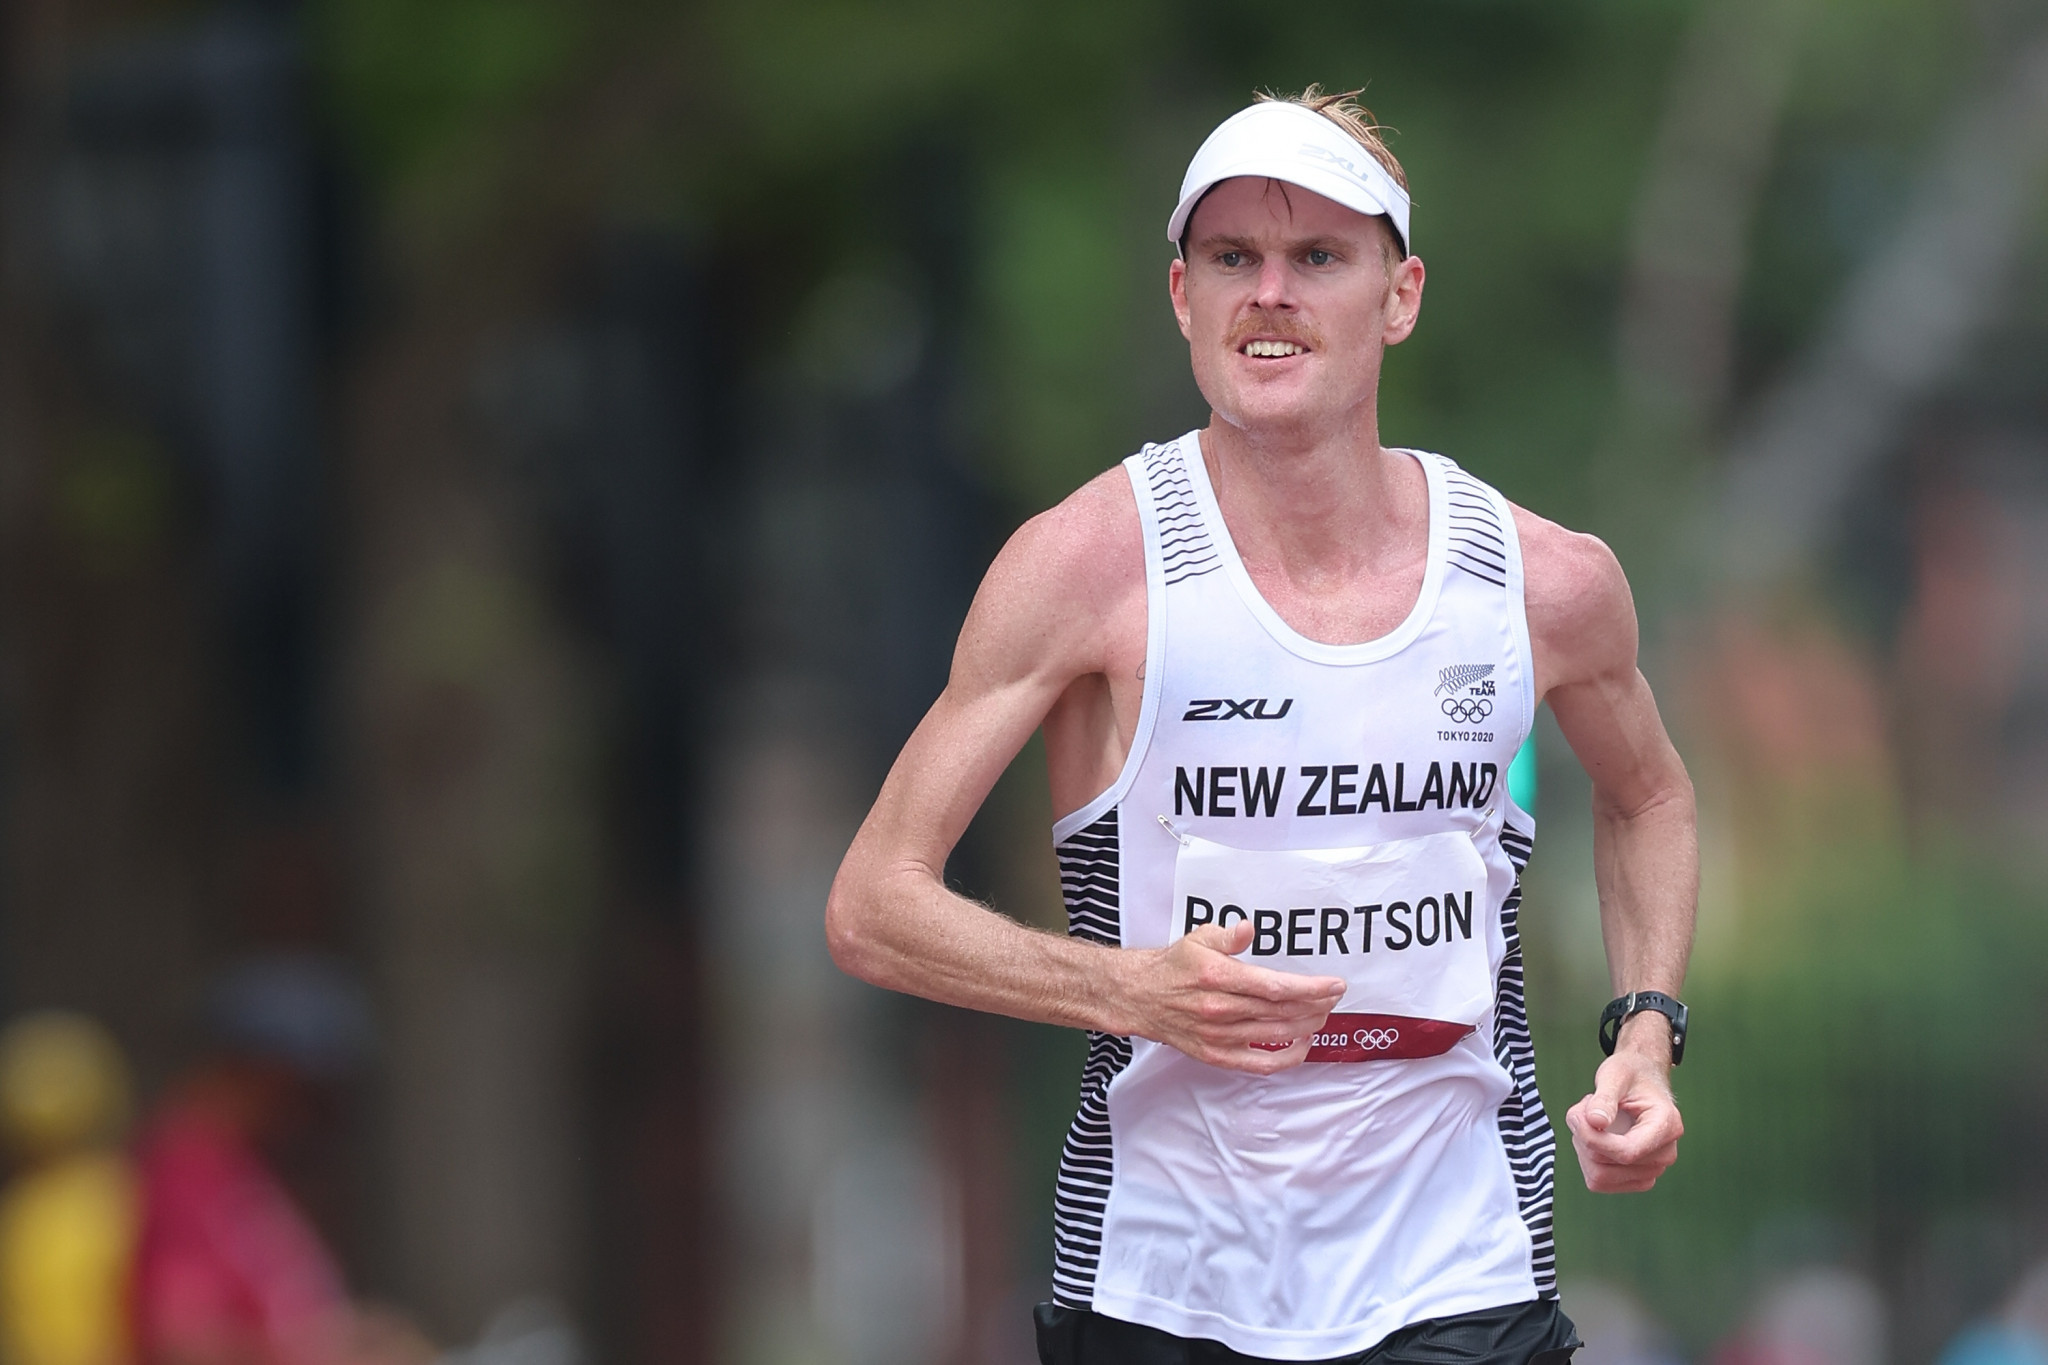 Commonwealth Games medallist Robertson arrested over sexual assault allegations hq nude picture